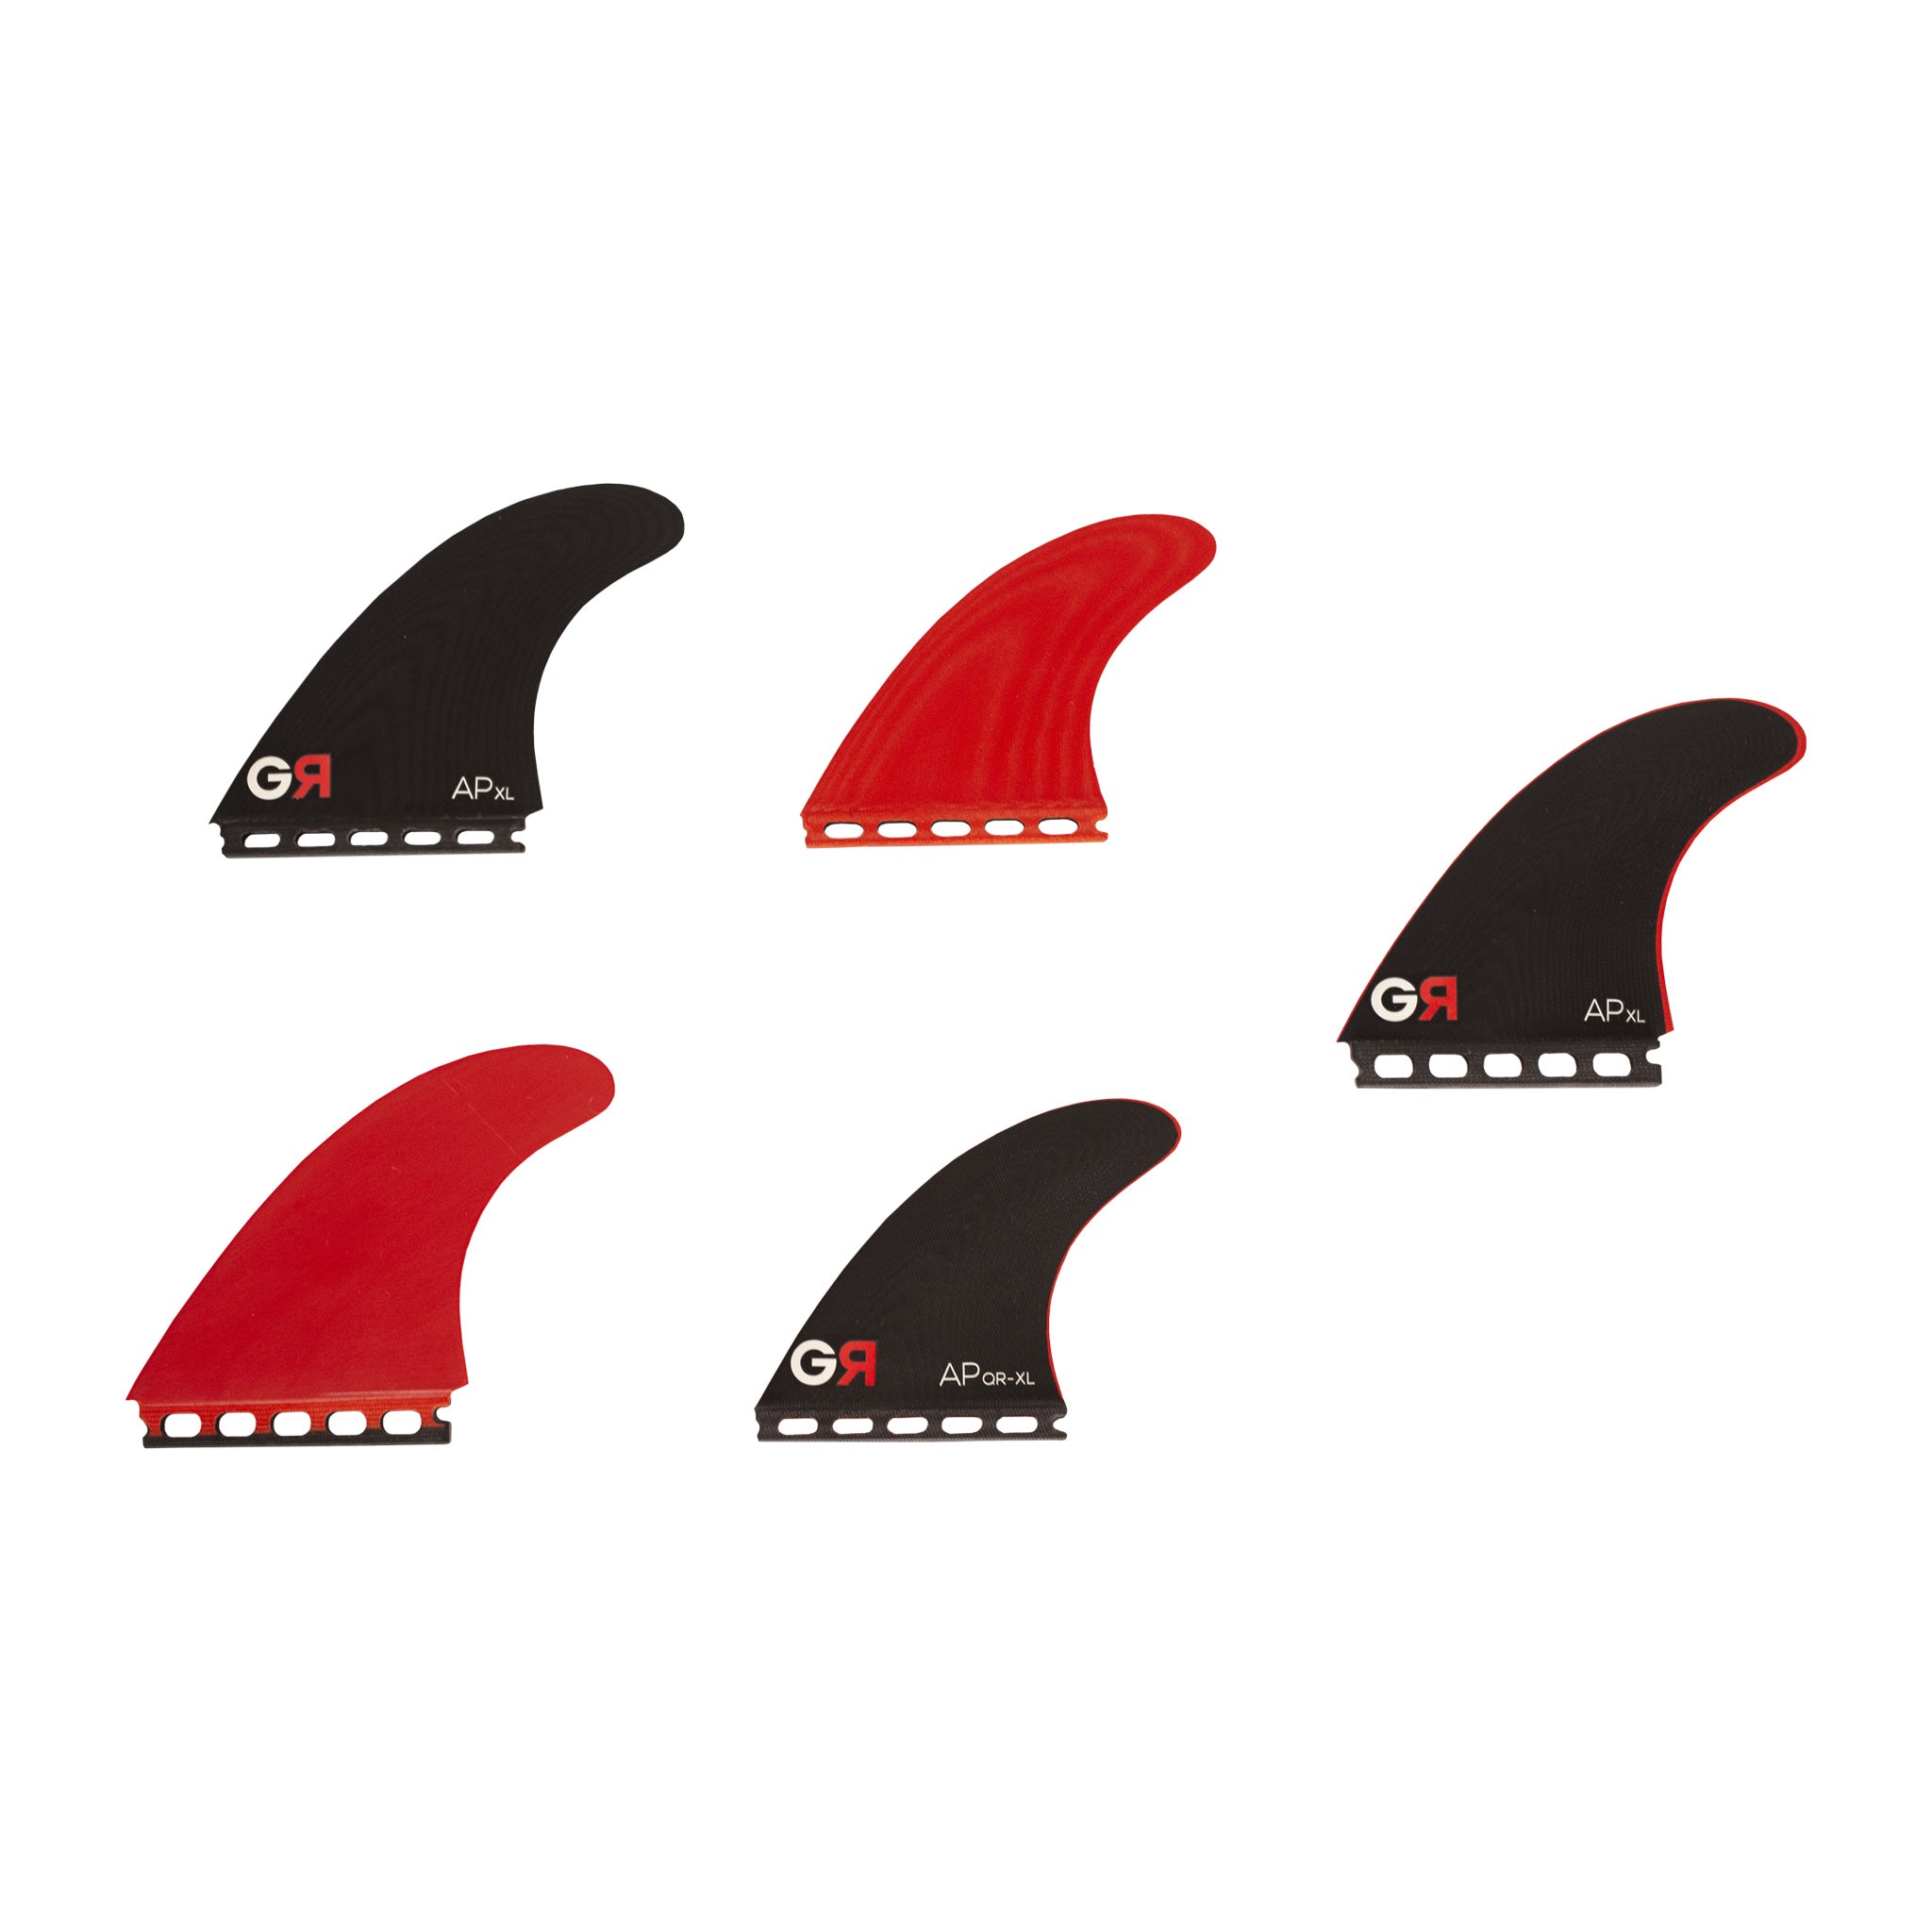 All-Performance Fins (5-Fin Futures) – GenRation (GR)